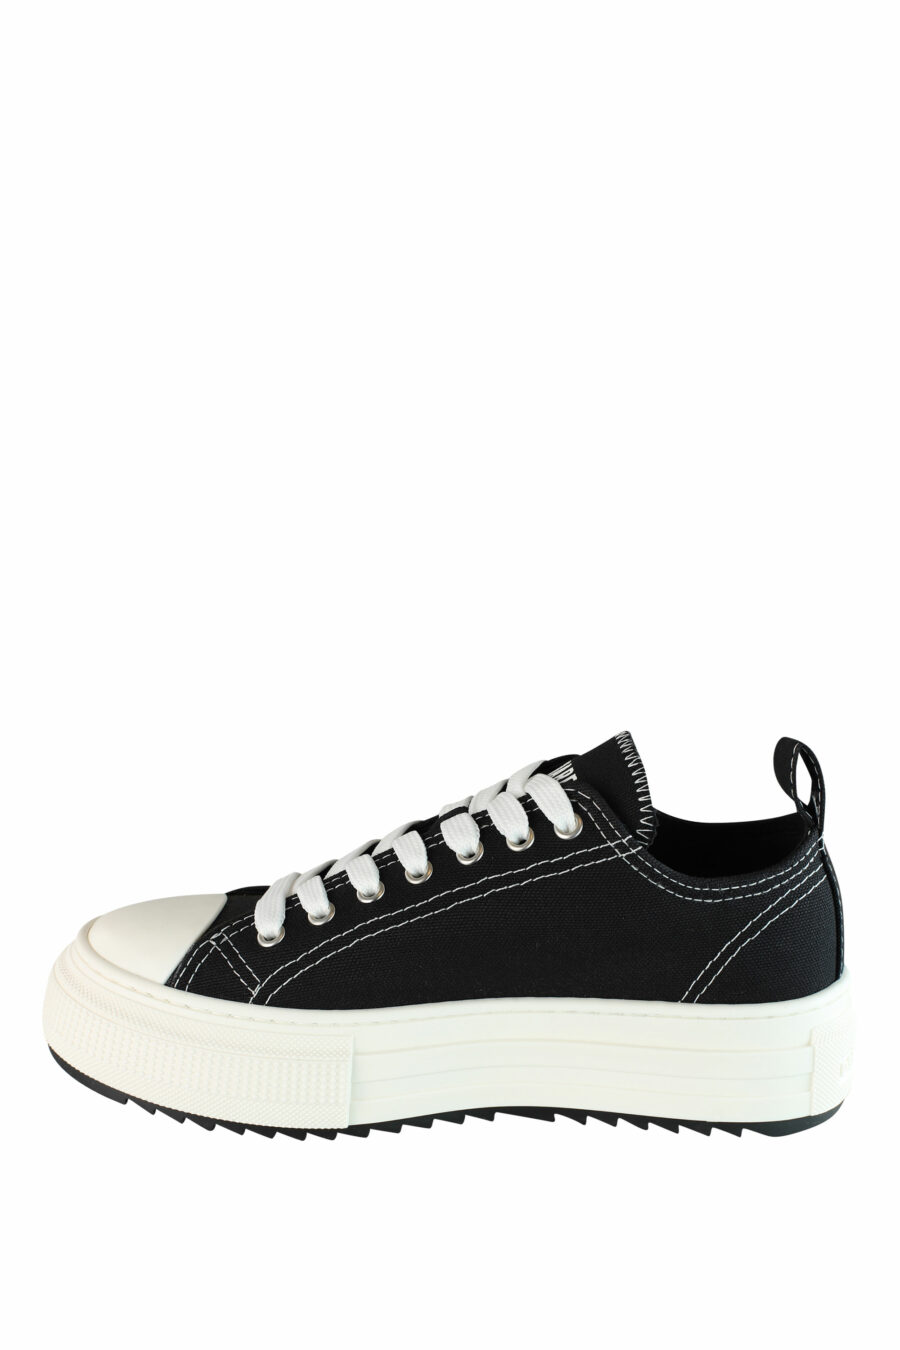 Black "berlin" trainers with platform and white mini-logo - IMG 1384